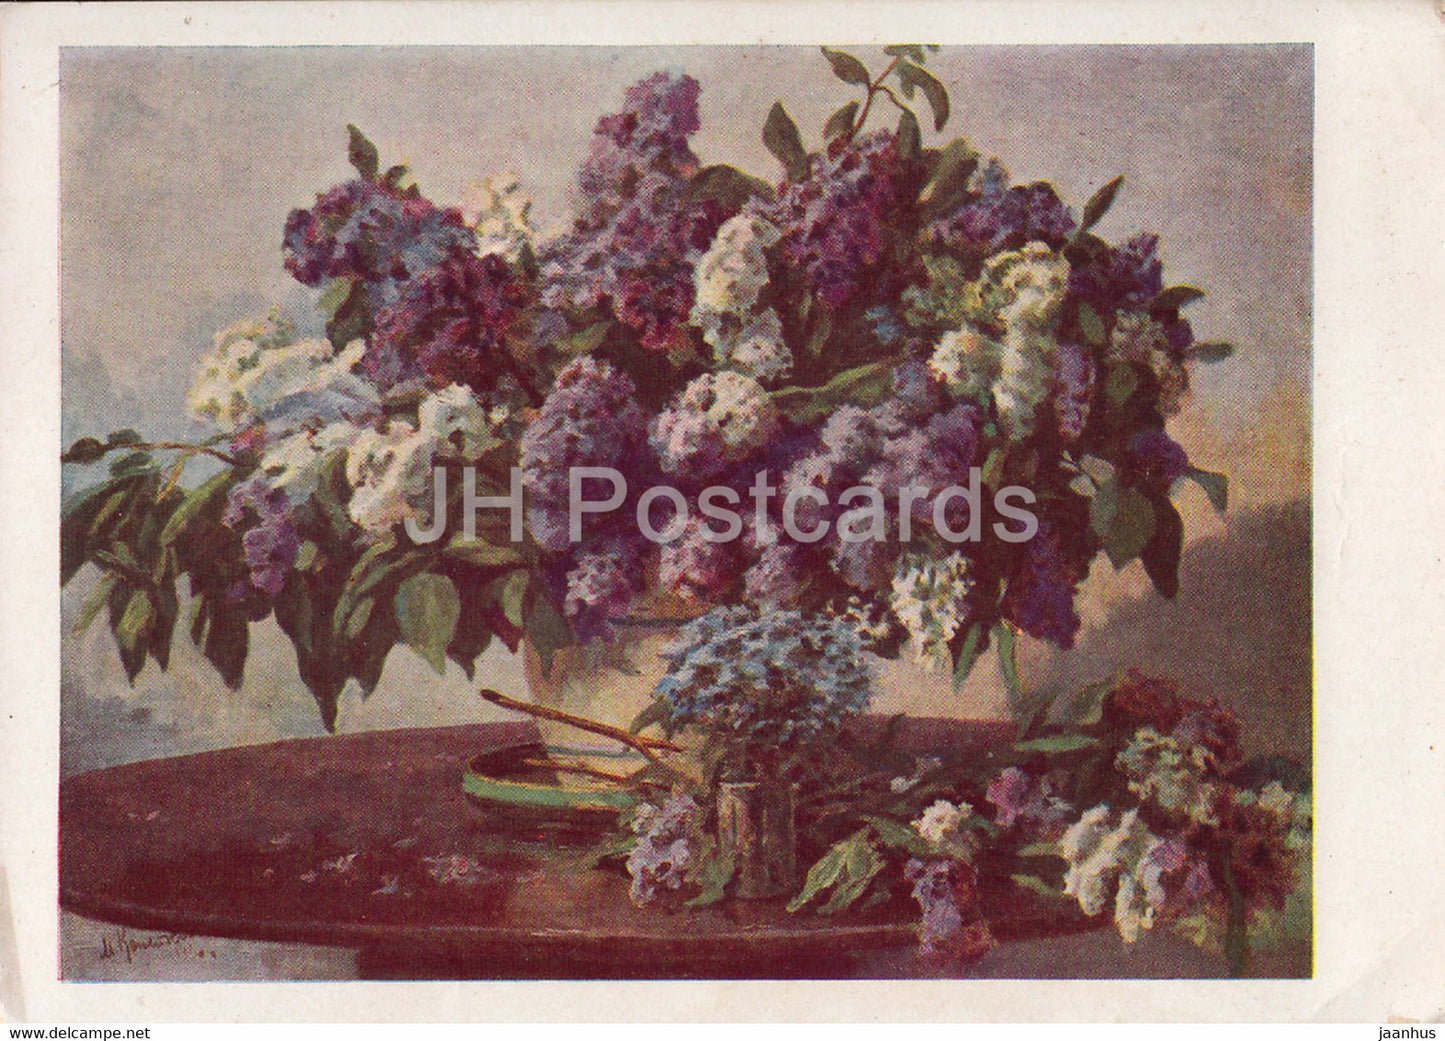 painting by M. Kopeykin - Lilac in the Vase - Russian art - postal stationery - 1963 - Russia DDR - unused - JH Postcards